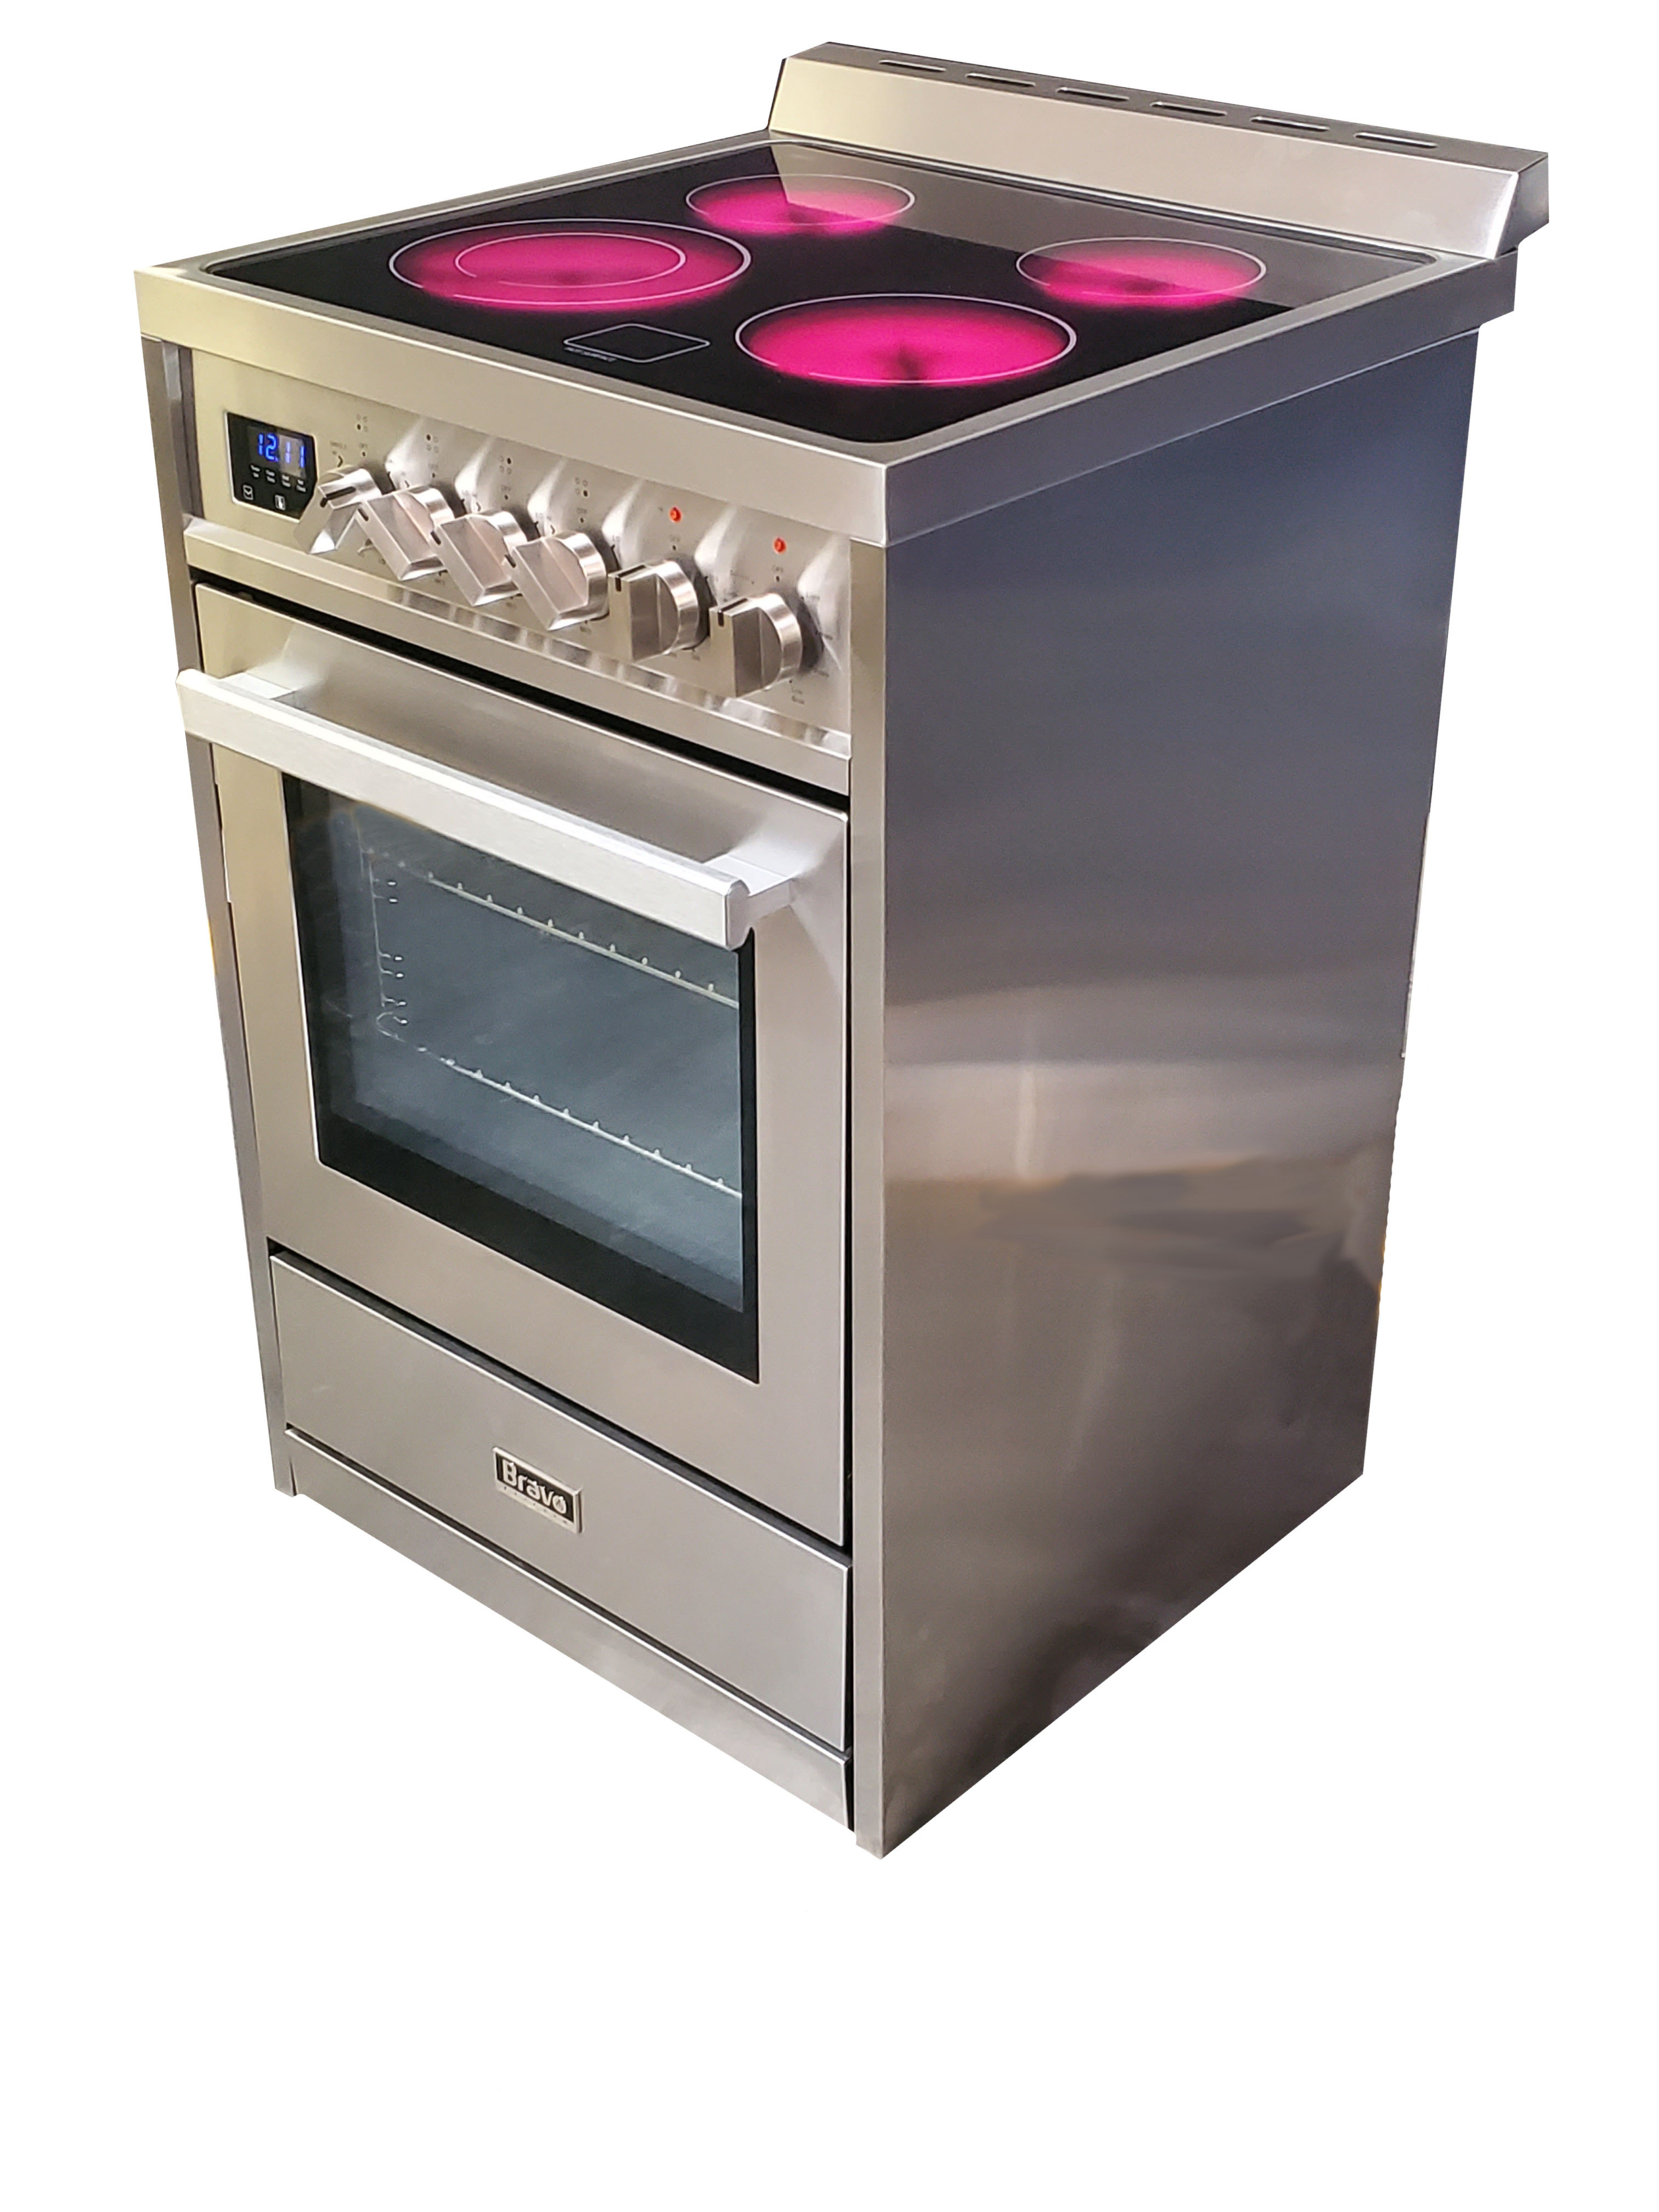 BRAVO KITCHEN 24 2 Cubic Feet Electric Freestanding Range with Radiant  Cooktop & Reviews